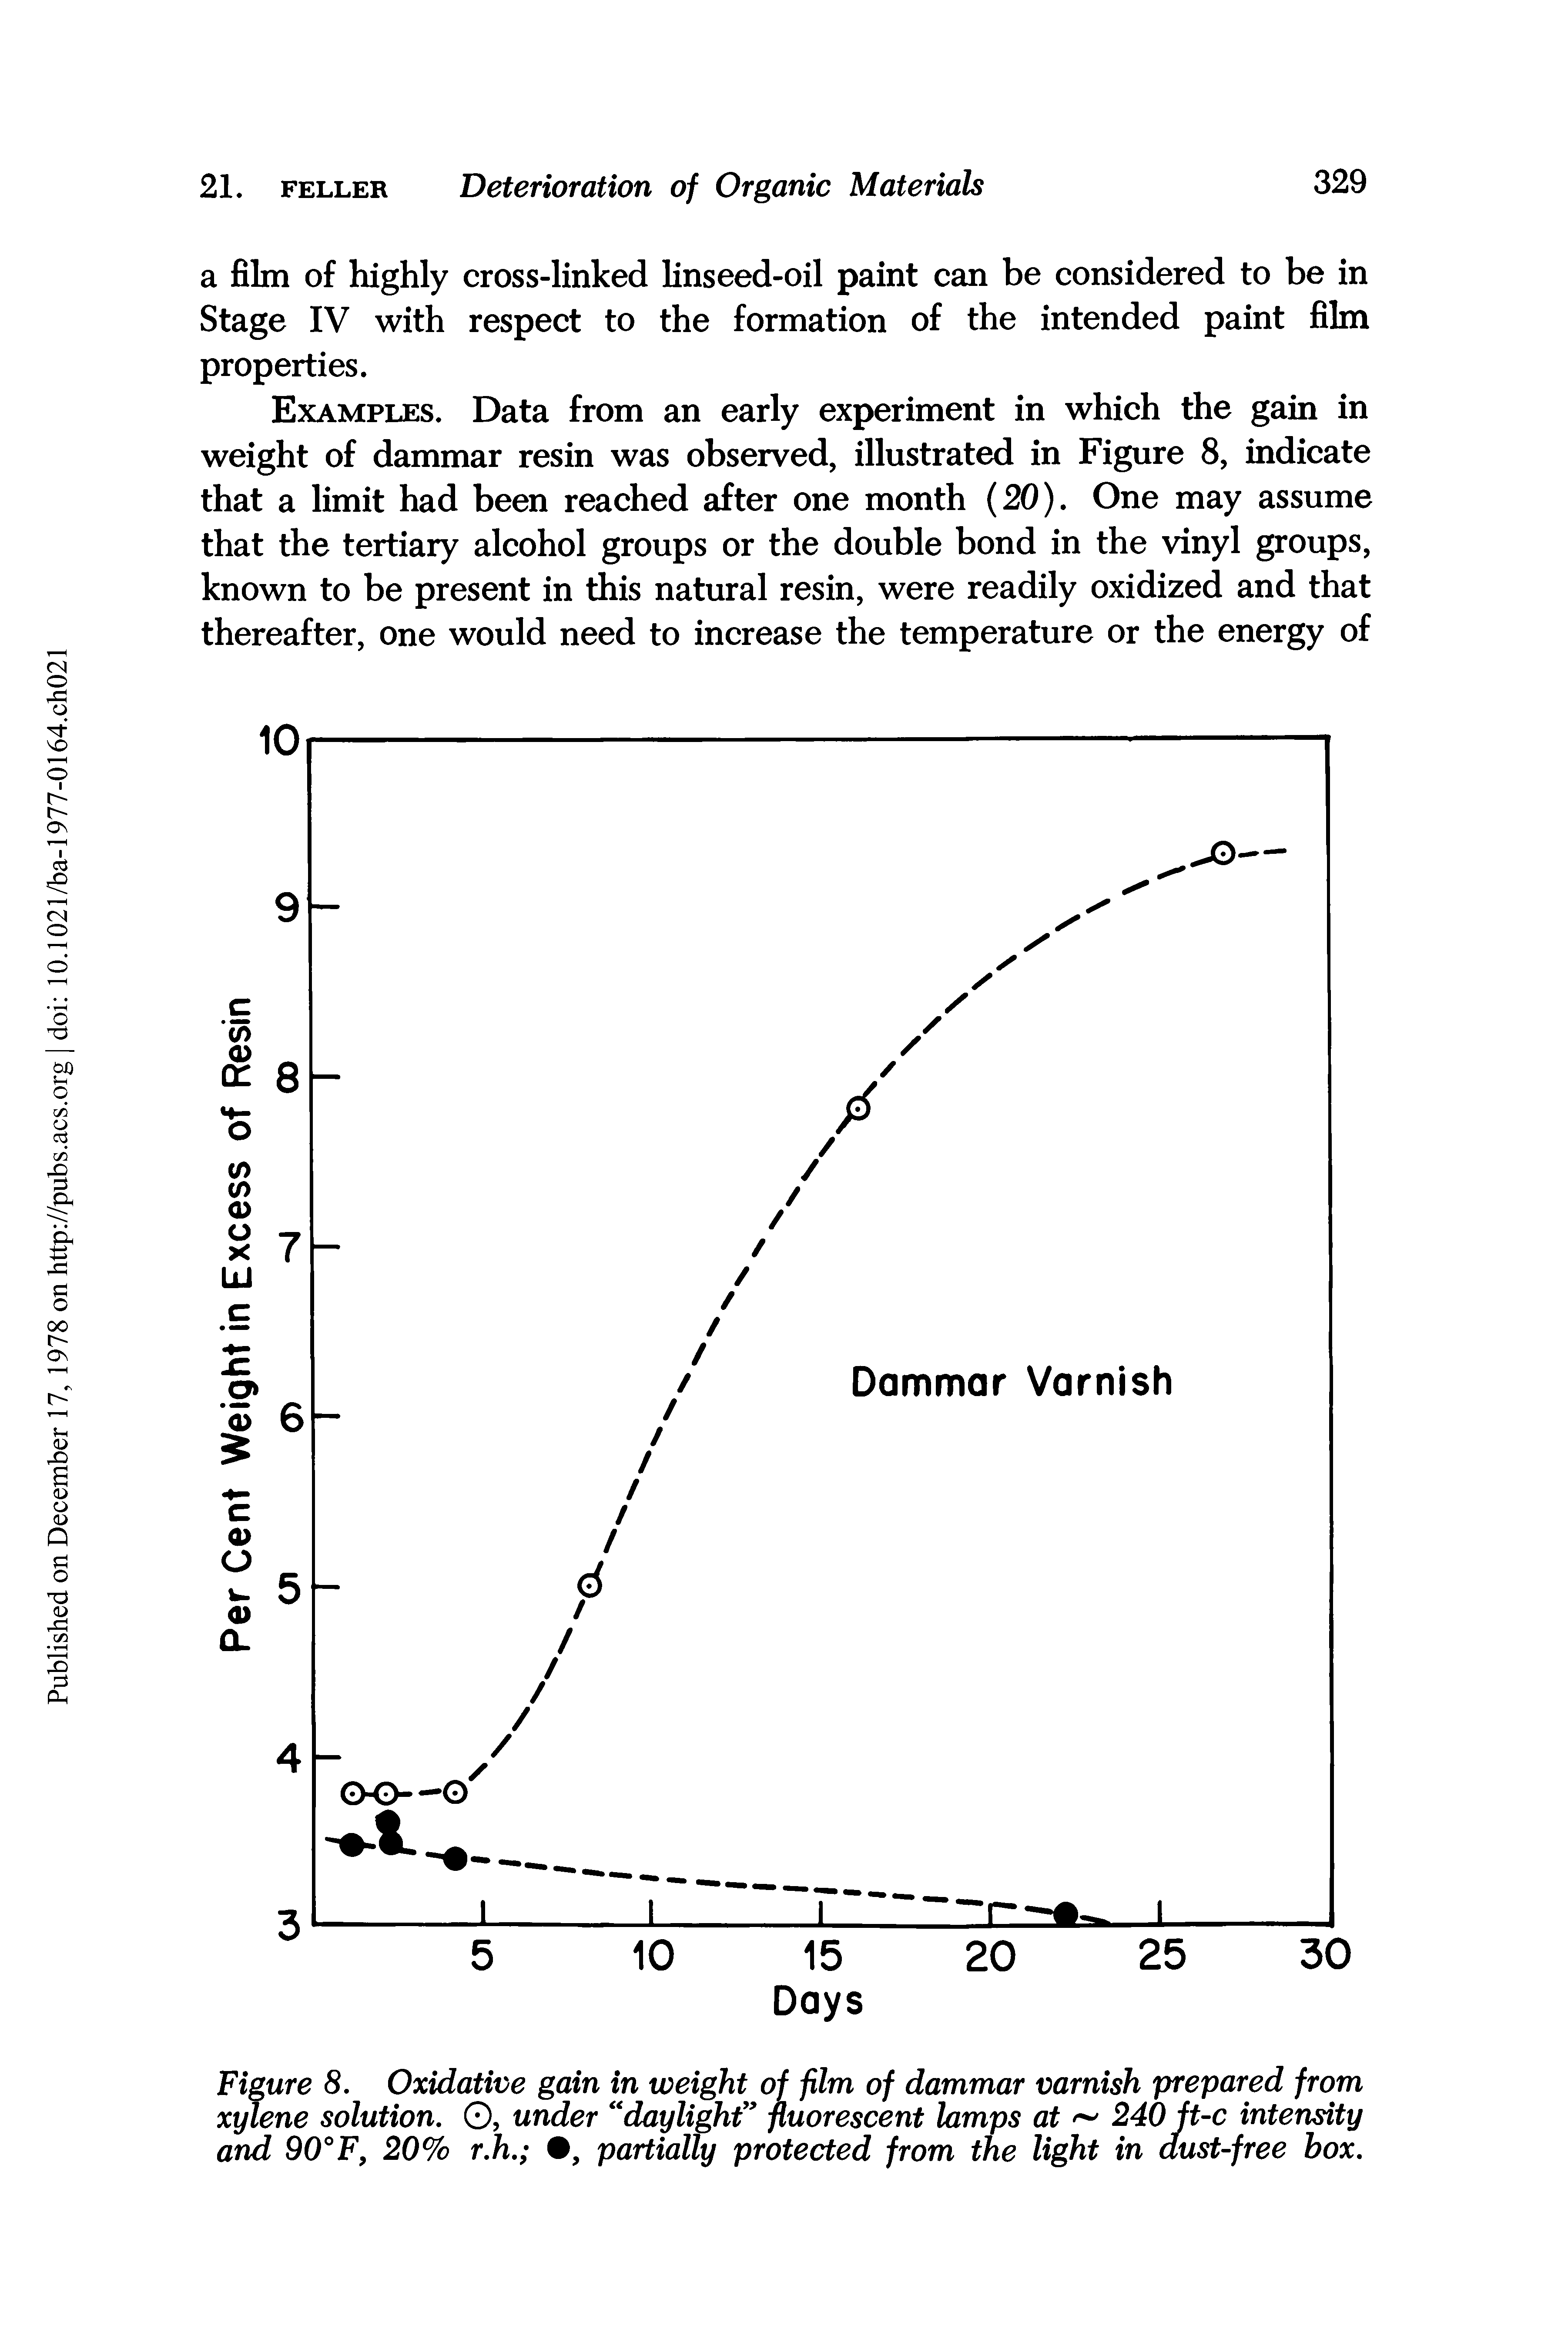 Figure 8. Oxidative gain in weight of film of dammar varnish prepared from xylene solution. , under daylight fluorescent lamps at 240 ft-c intensity and 90°F, 20% r.h. , partially protected from the light in aust-free box.